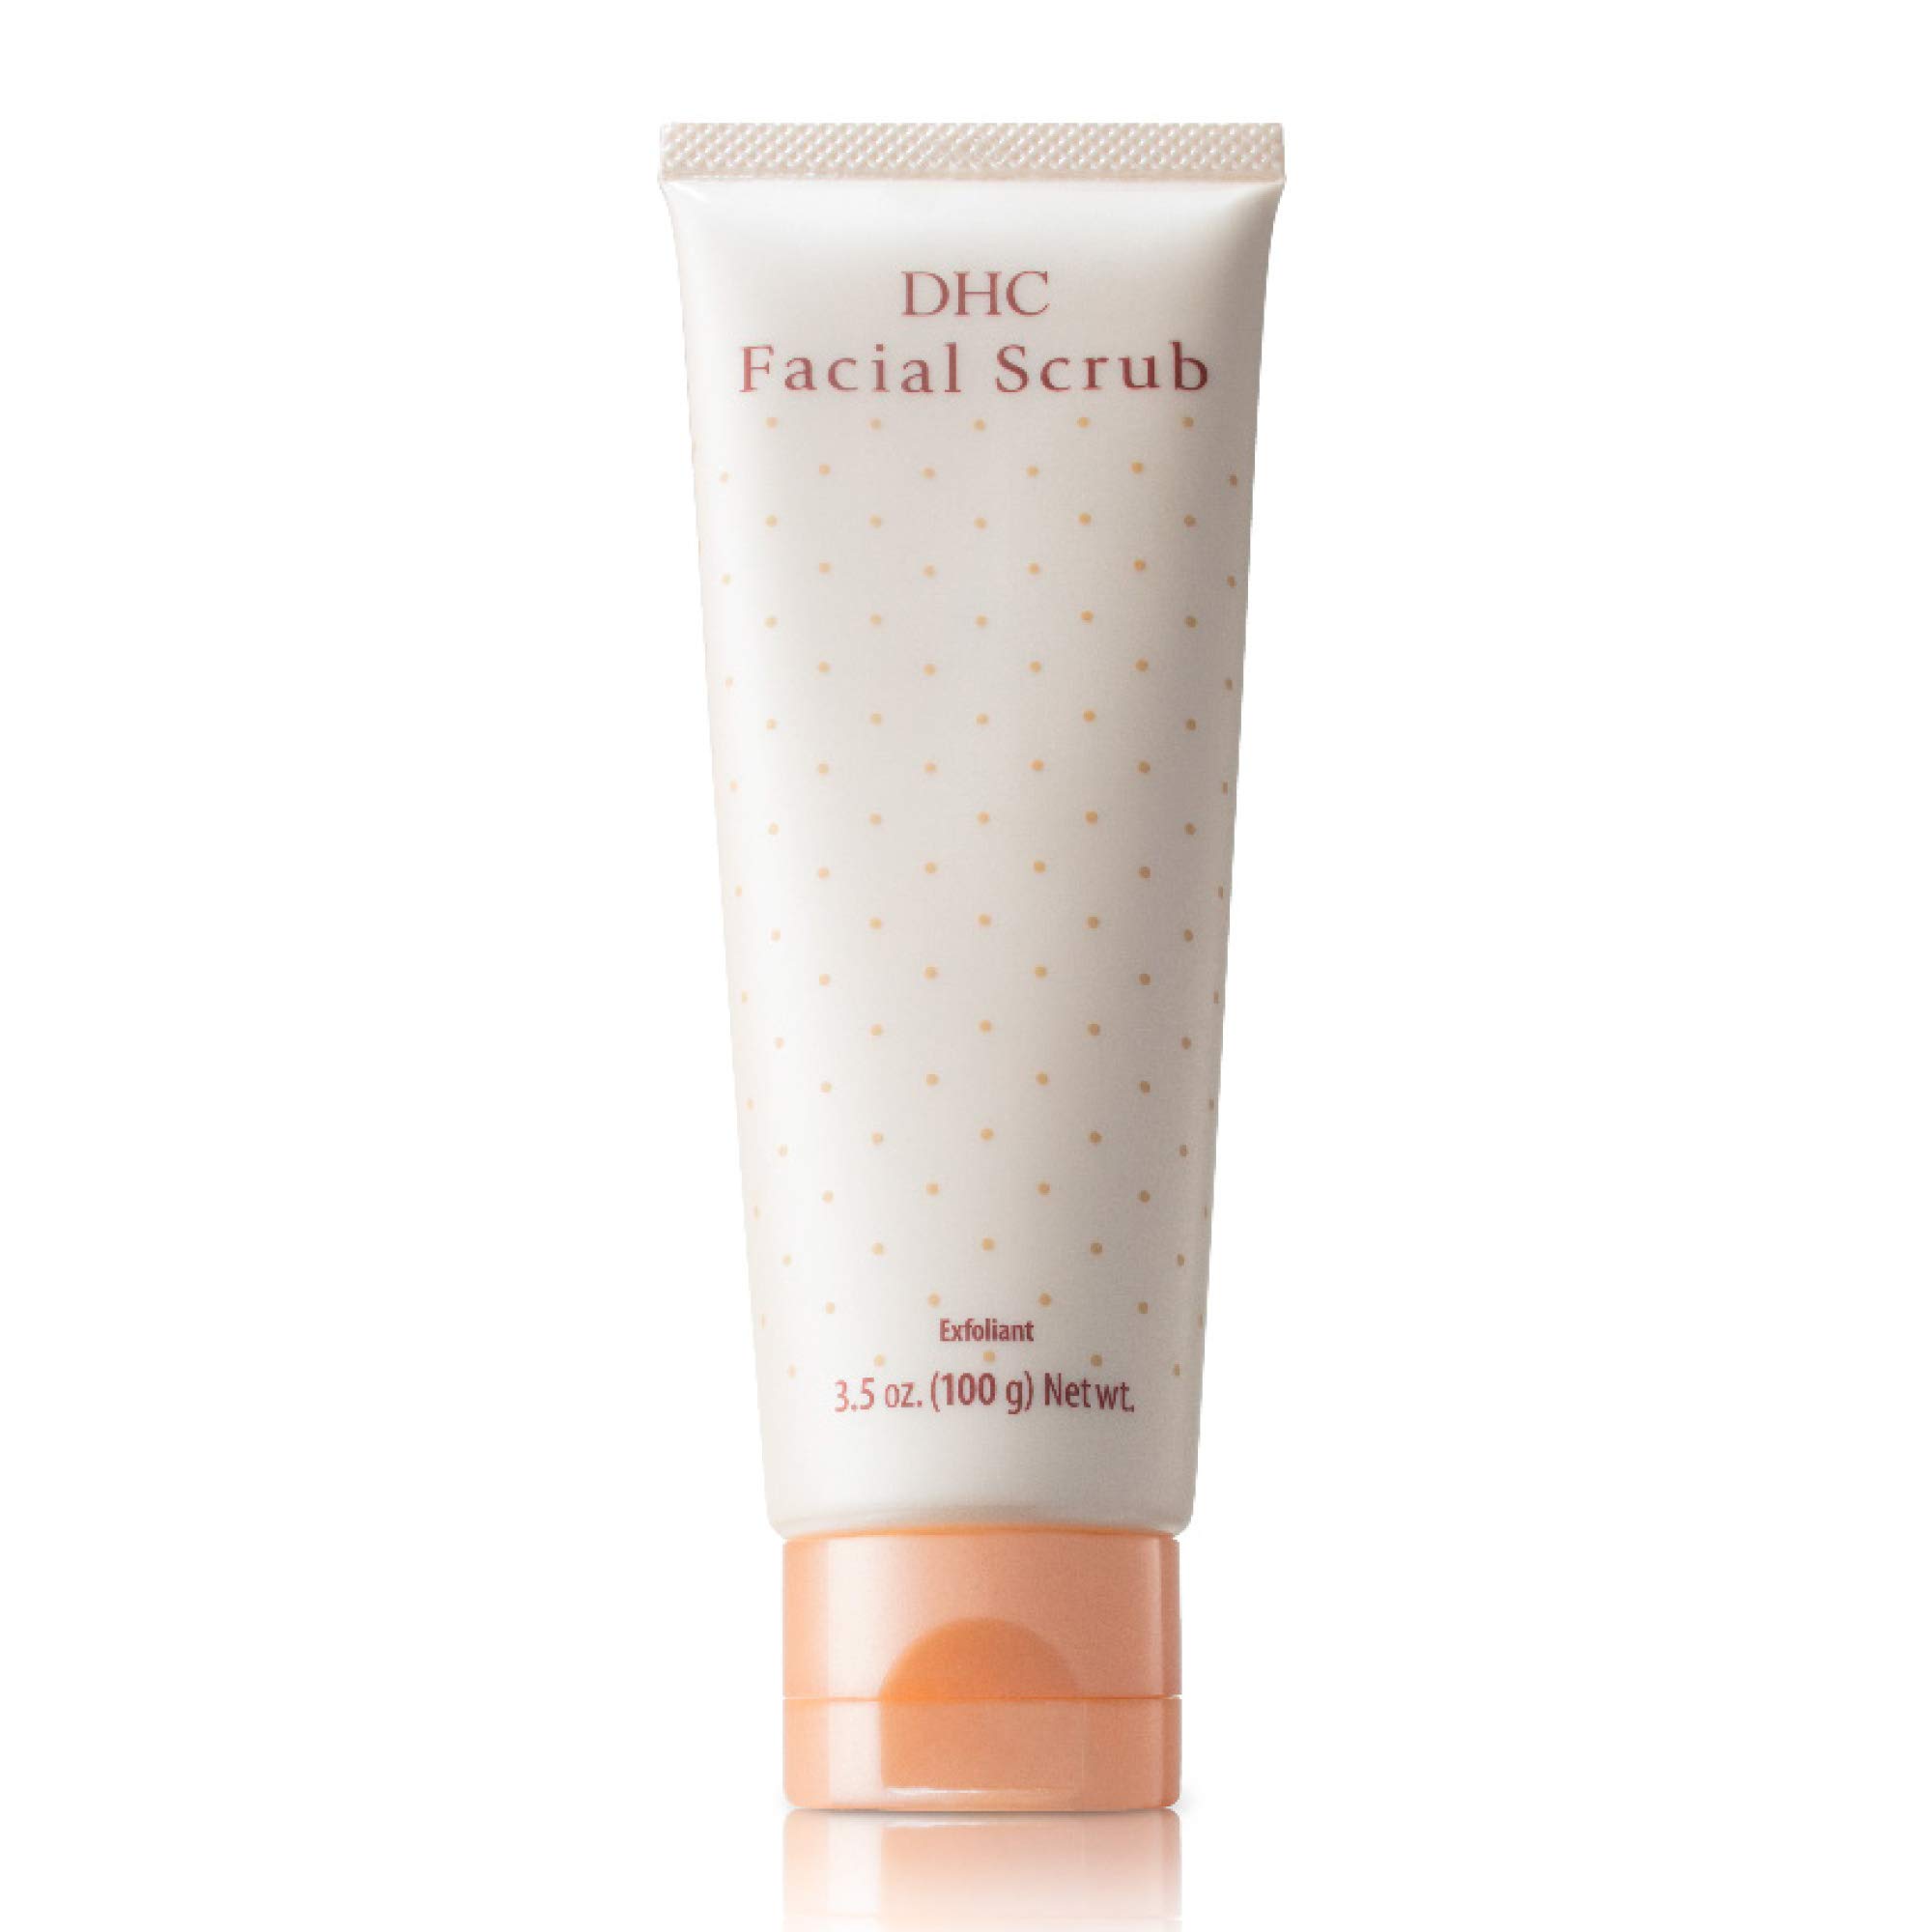 DHC Facial Scrub, Gentle Exfoliating Scrub, Creamy Microbead-Free Cleanser, Smooth, Hydrating, Clearer-Looking Complexion, Ideal for All Skin Types, 3.5 oz. Net wt.